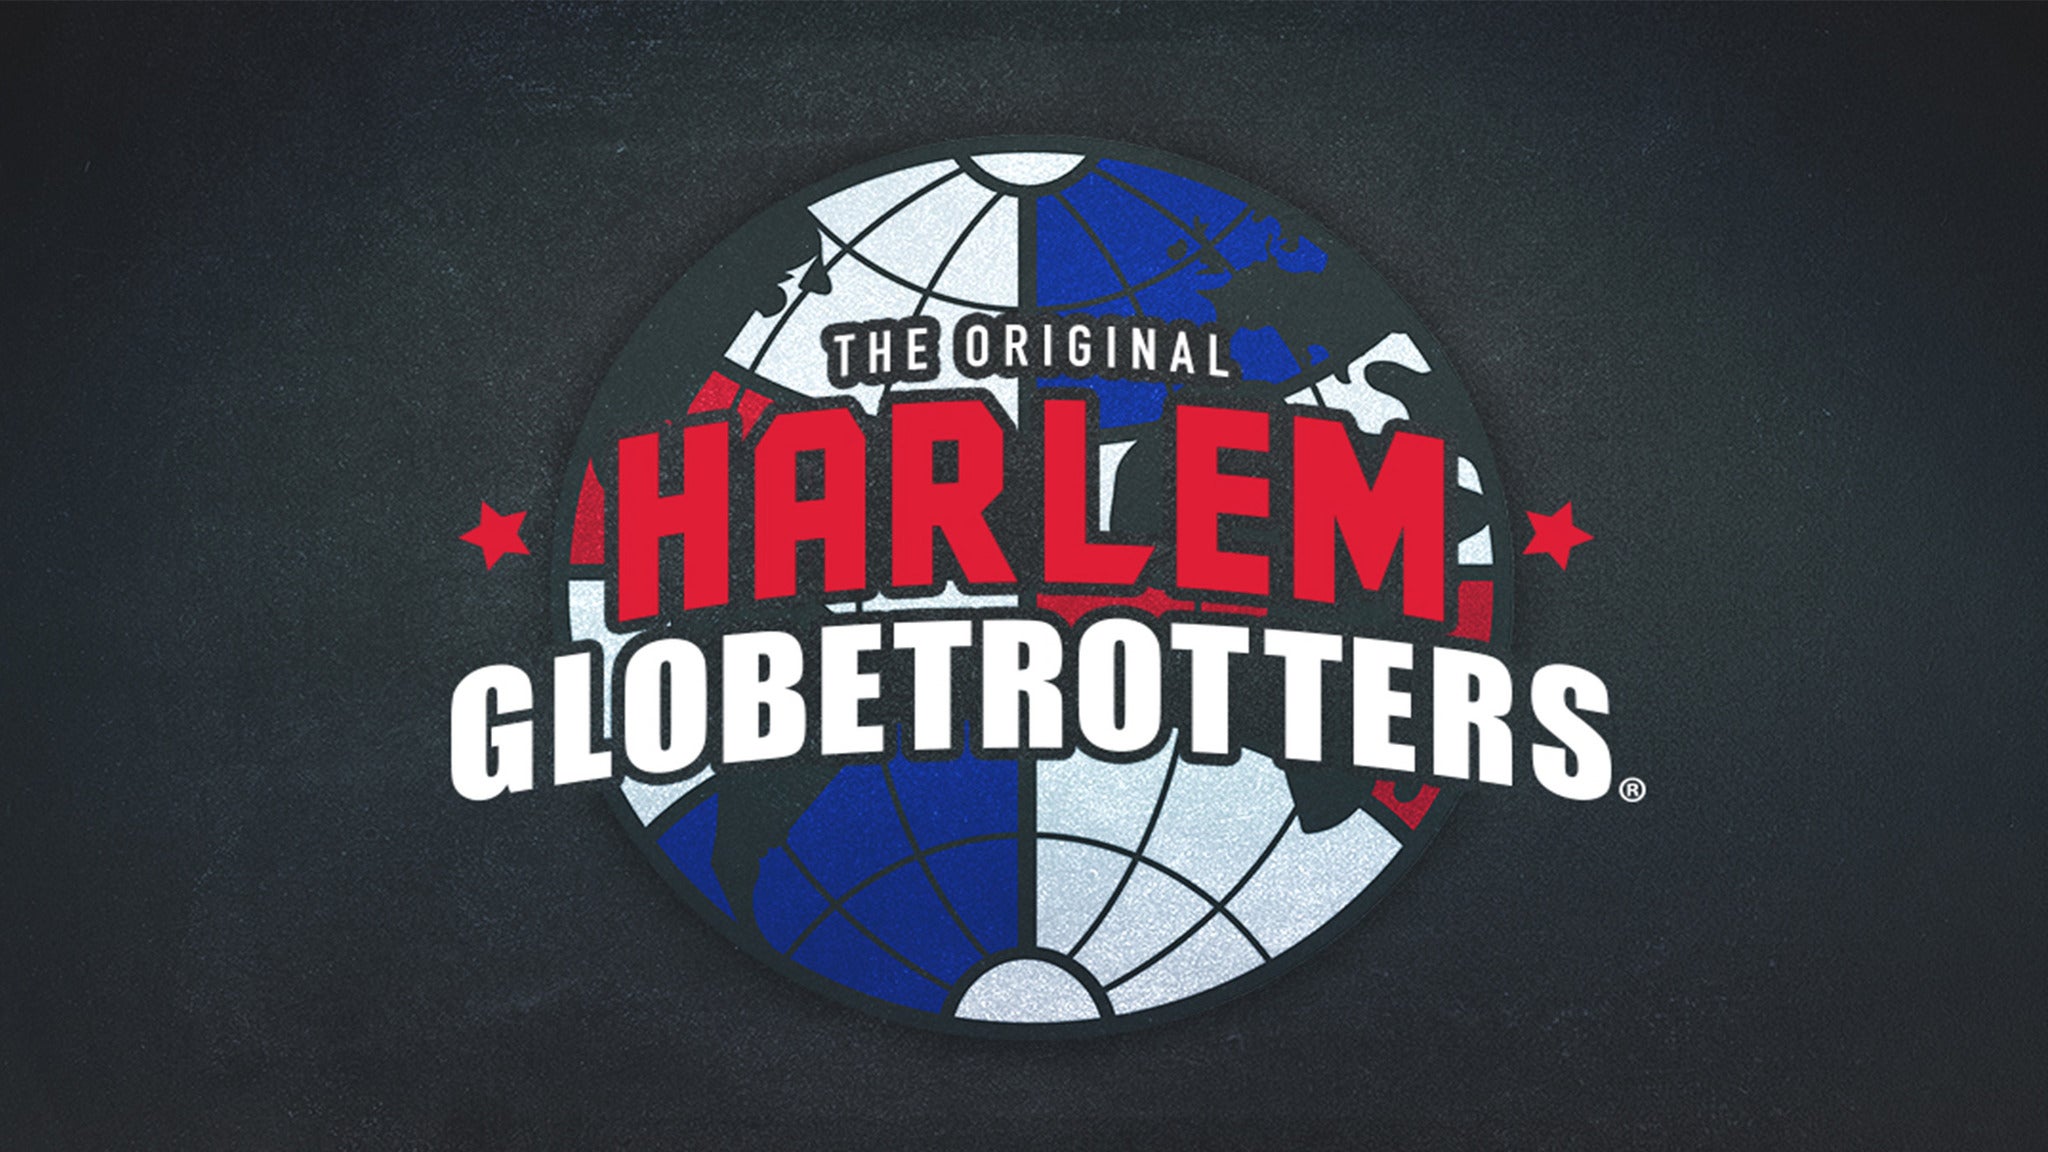 Harlem Globetrotters World Tour Presented by Jersey Mike s Subs in Boston event information